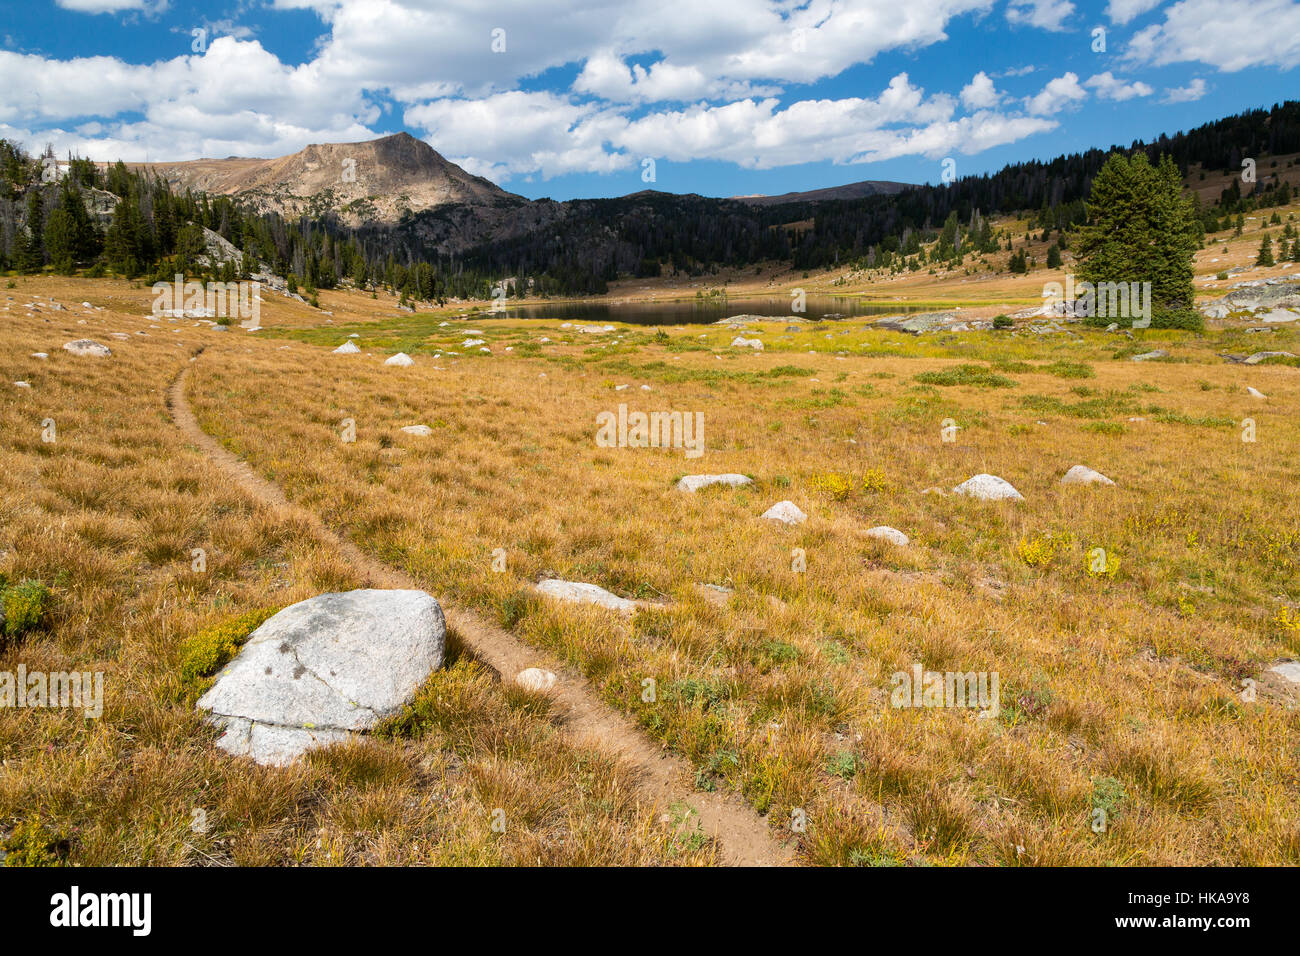 The Beartooth Loop Trail winding around to Losekamp Lake in the Beartooth Mountains. Shoshone National Forest, Wyoming Stock Photo